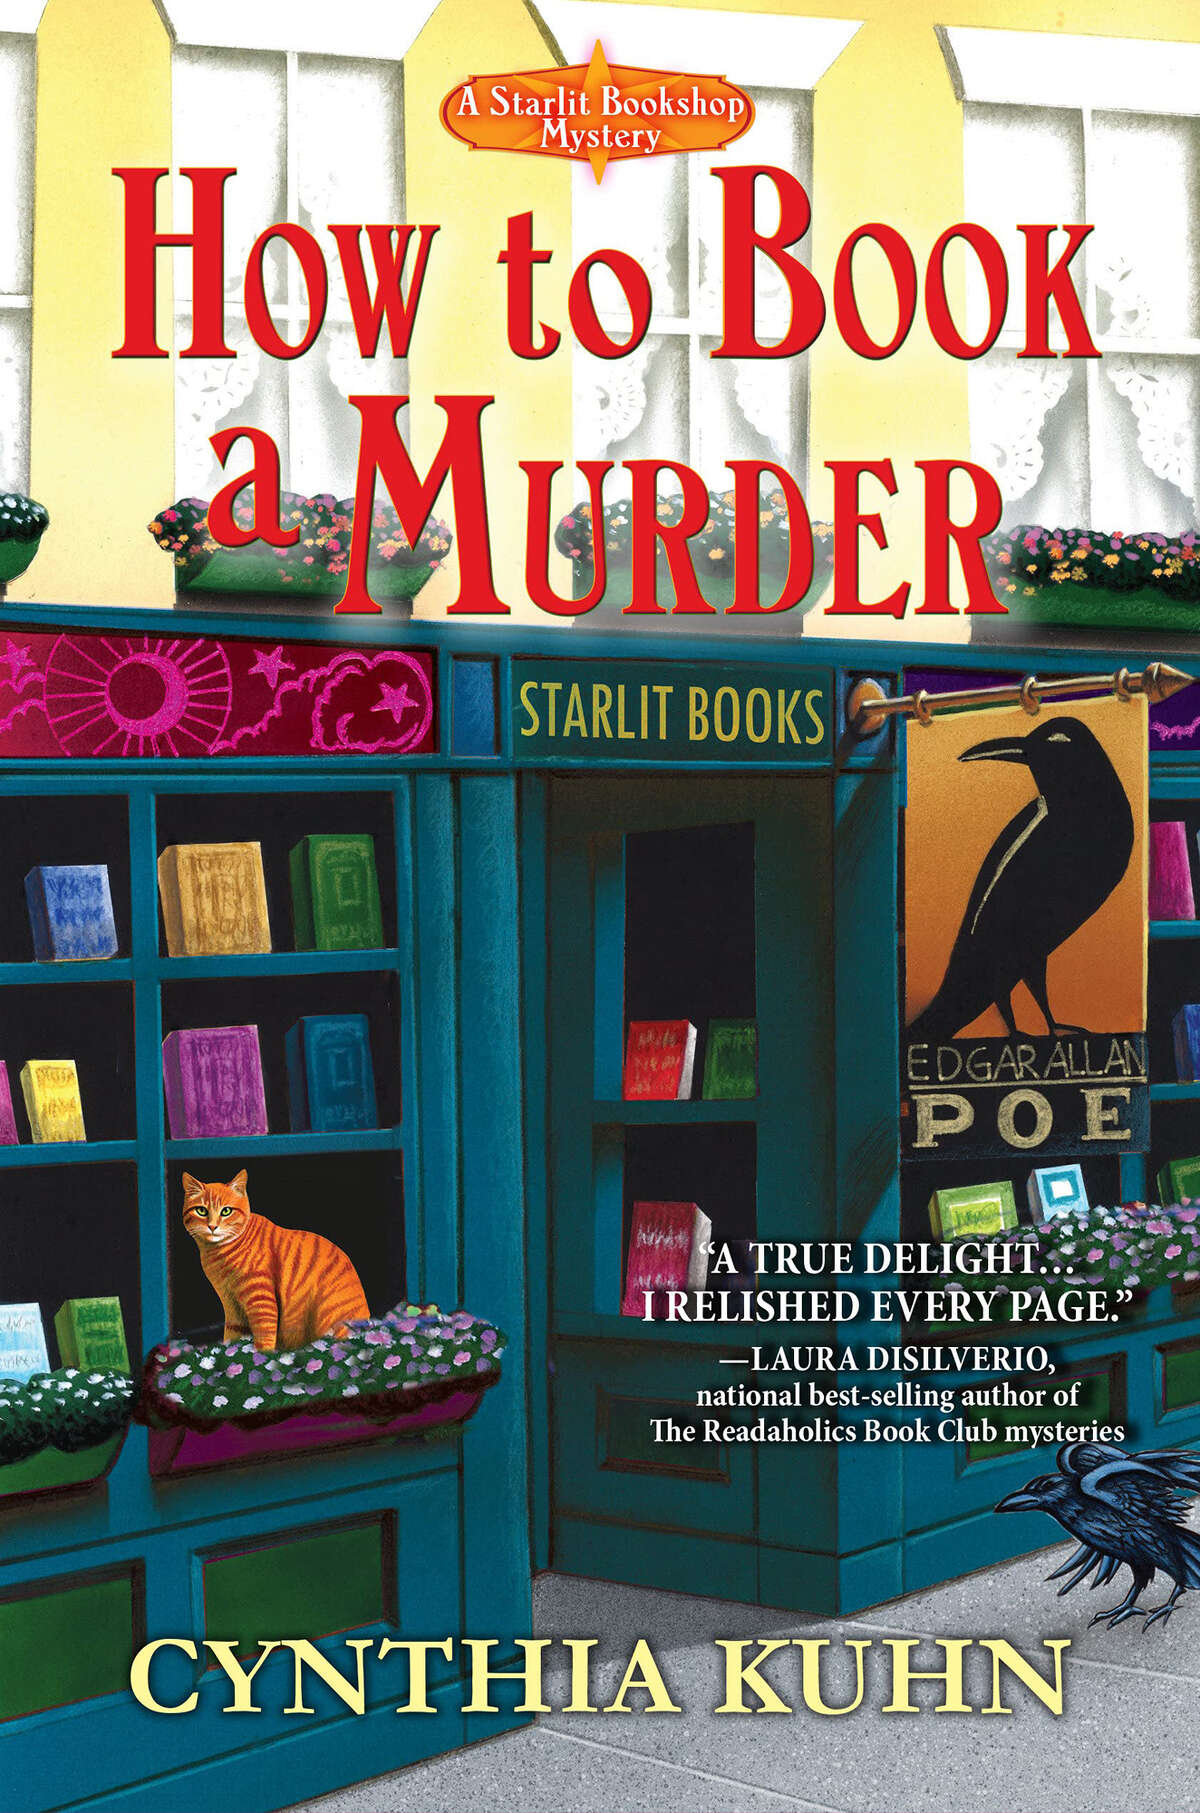 "How to Book a Murder"